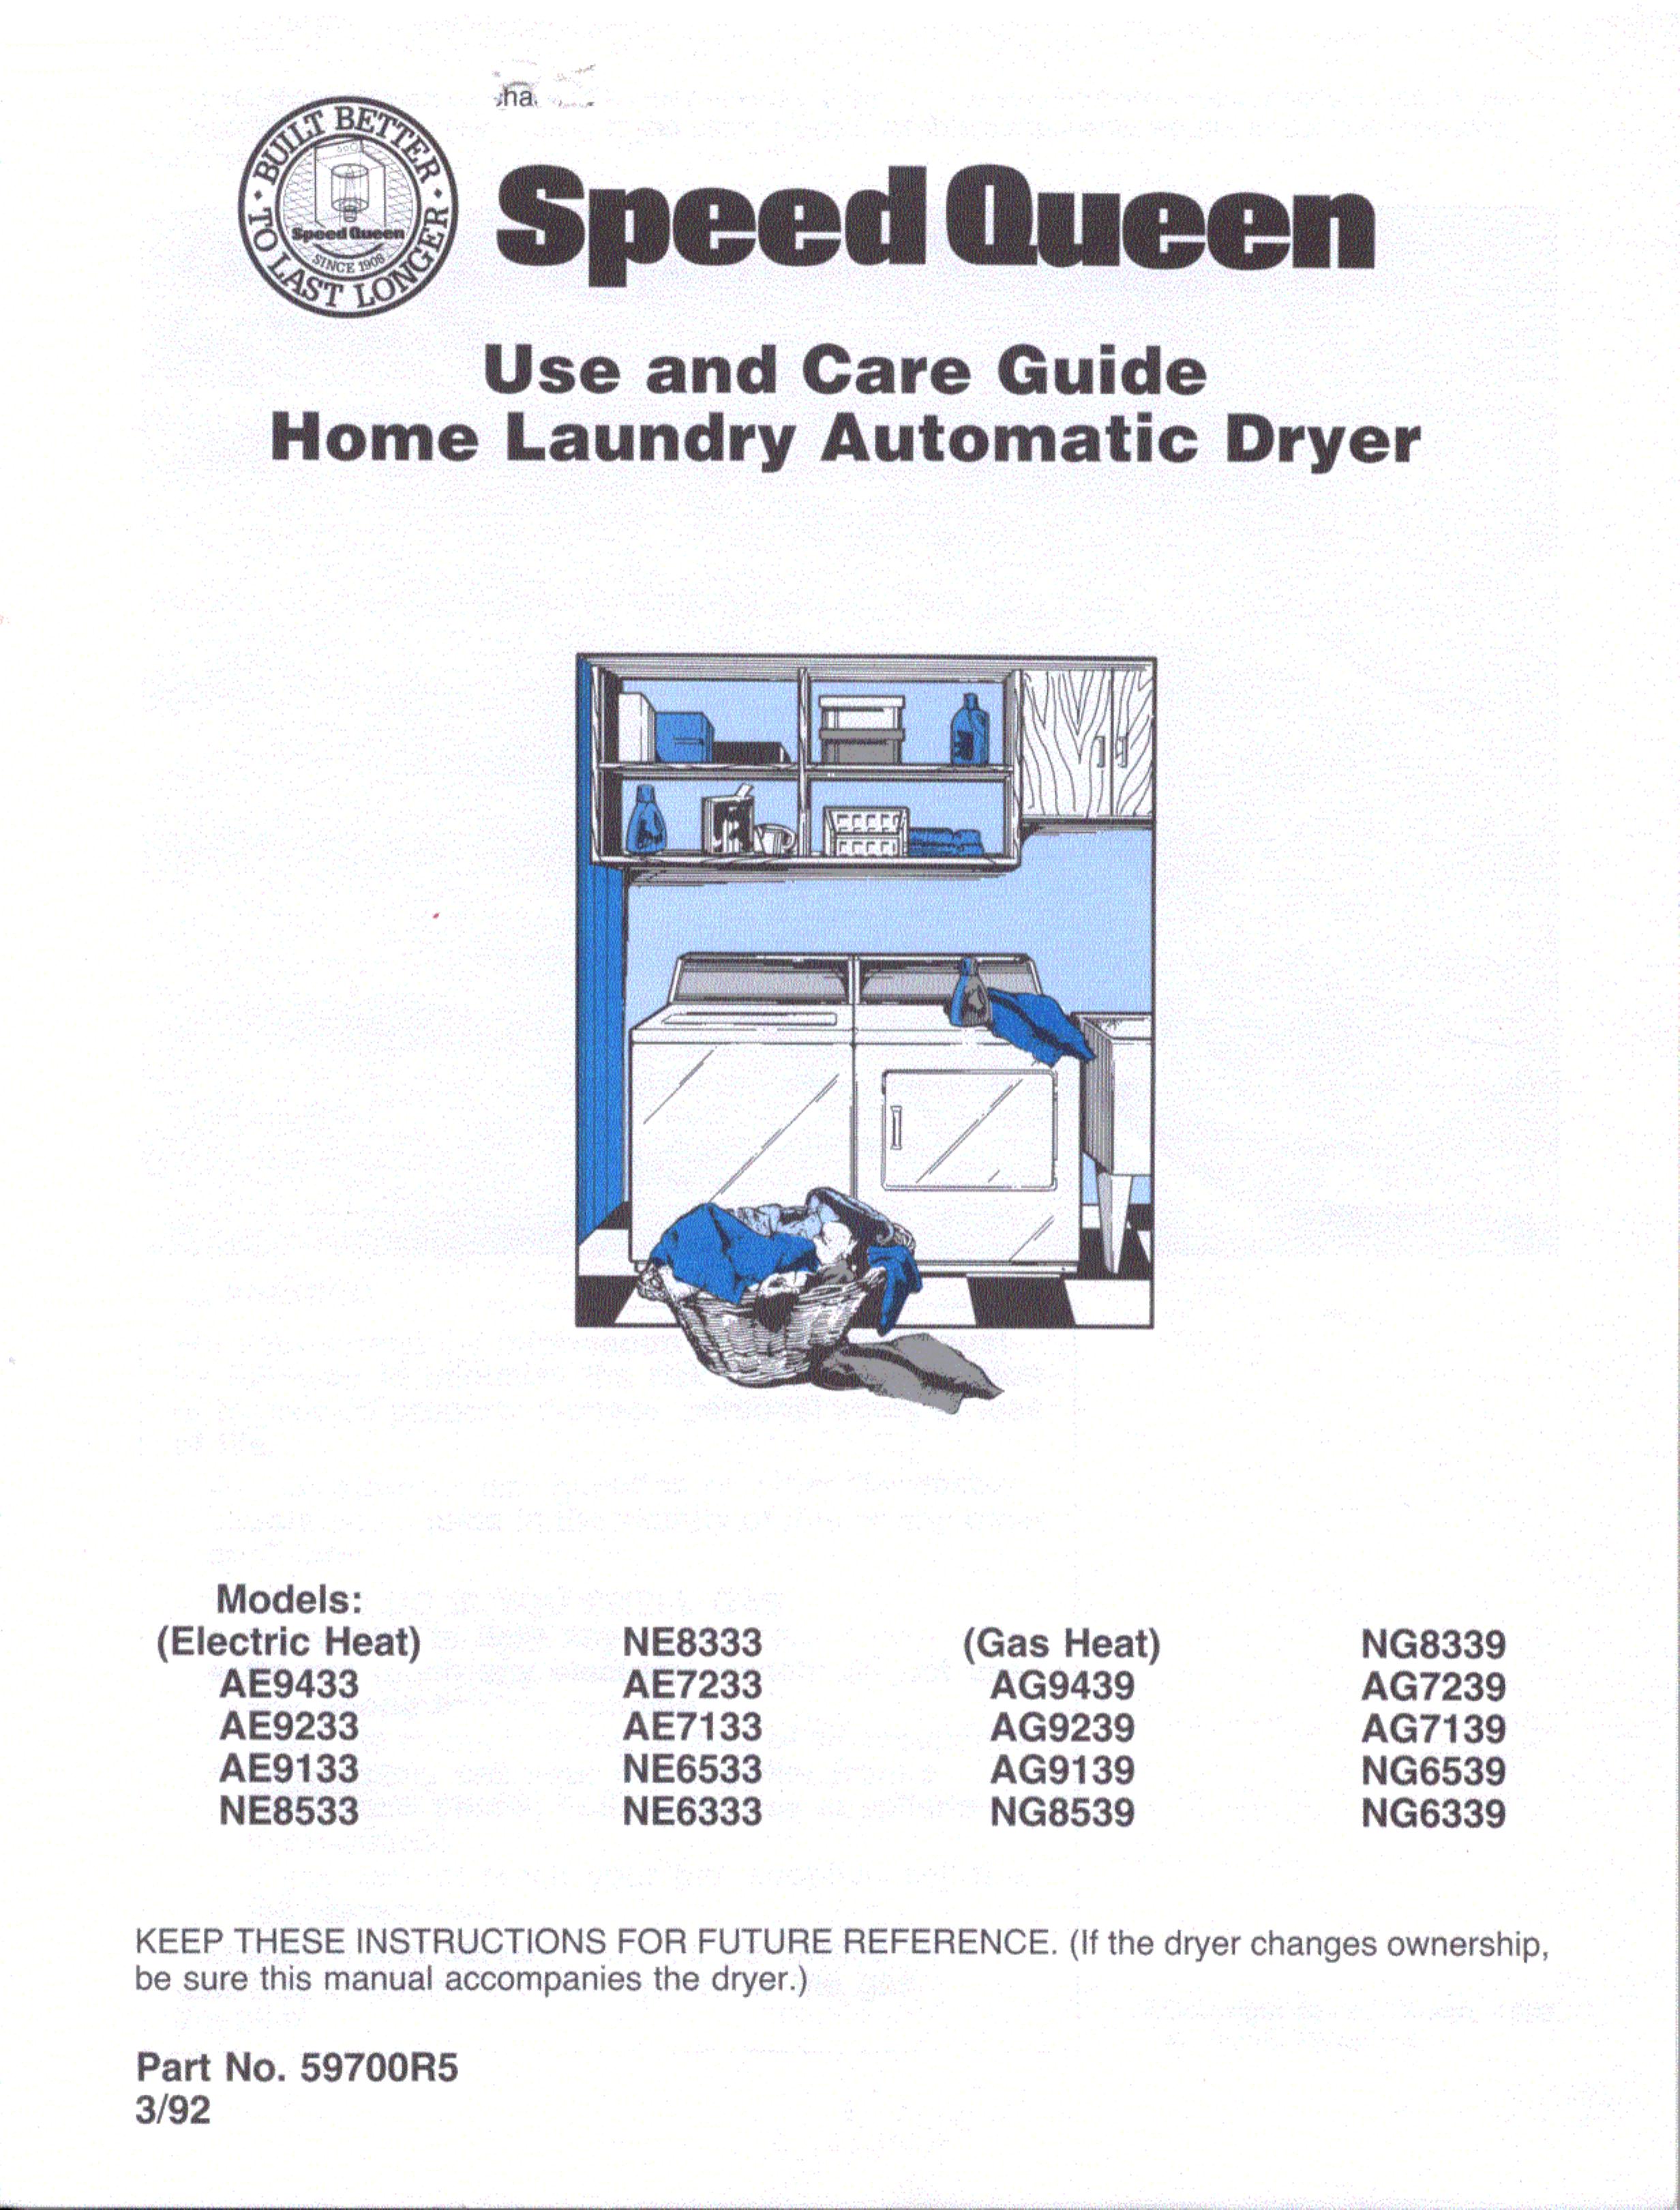 Speed Queen AG7239 Clothes Dryer User Manual